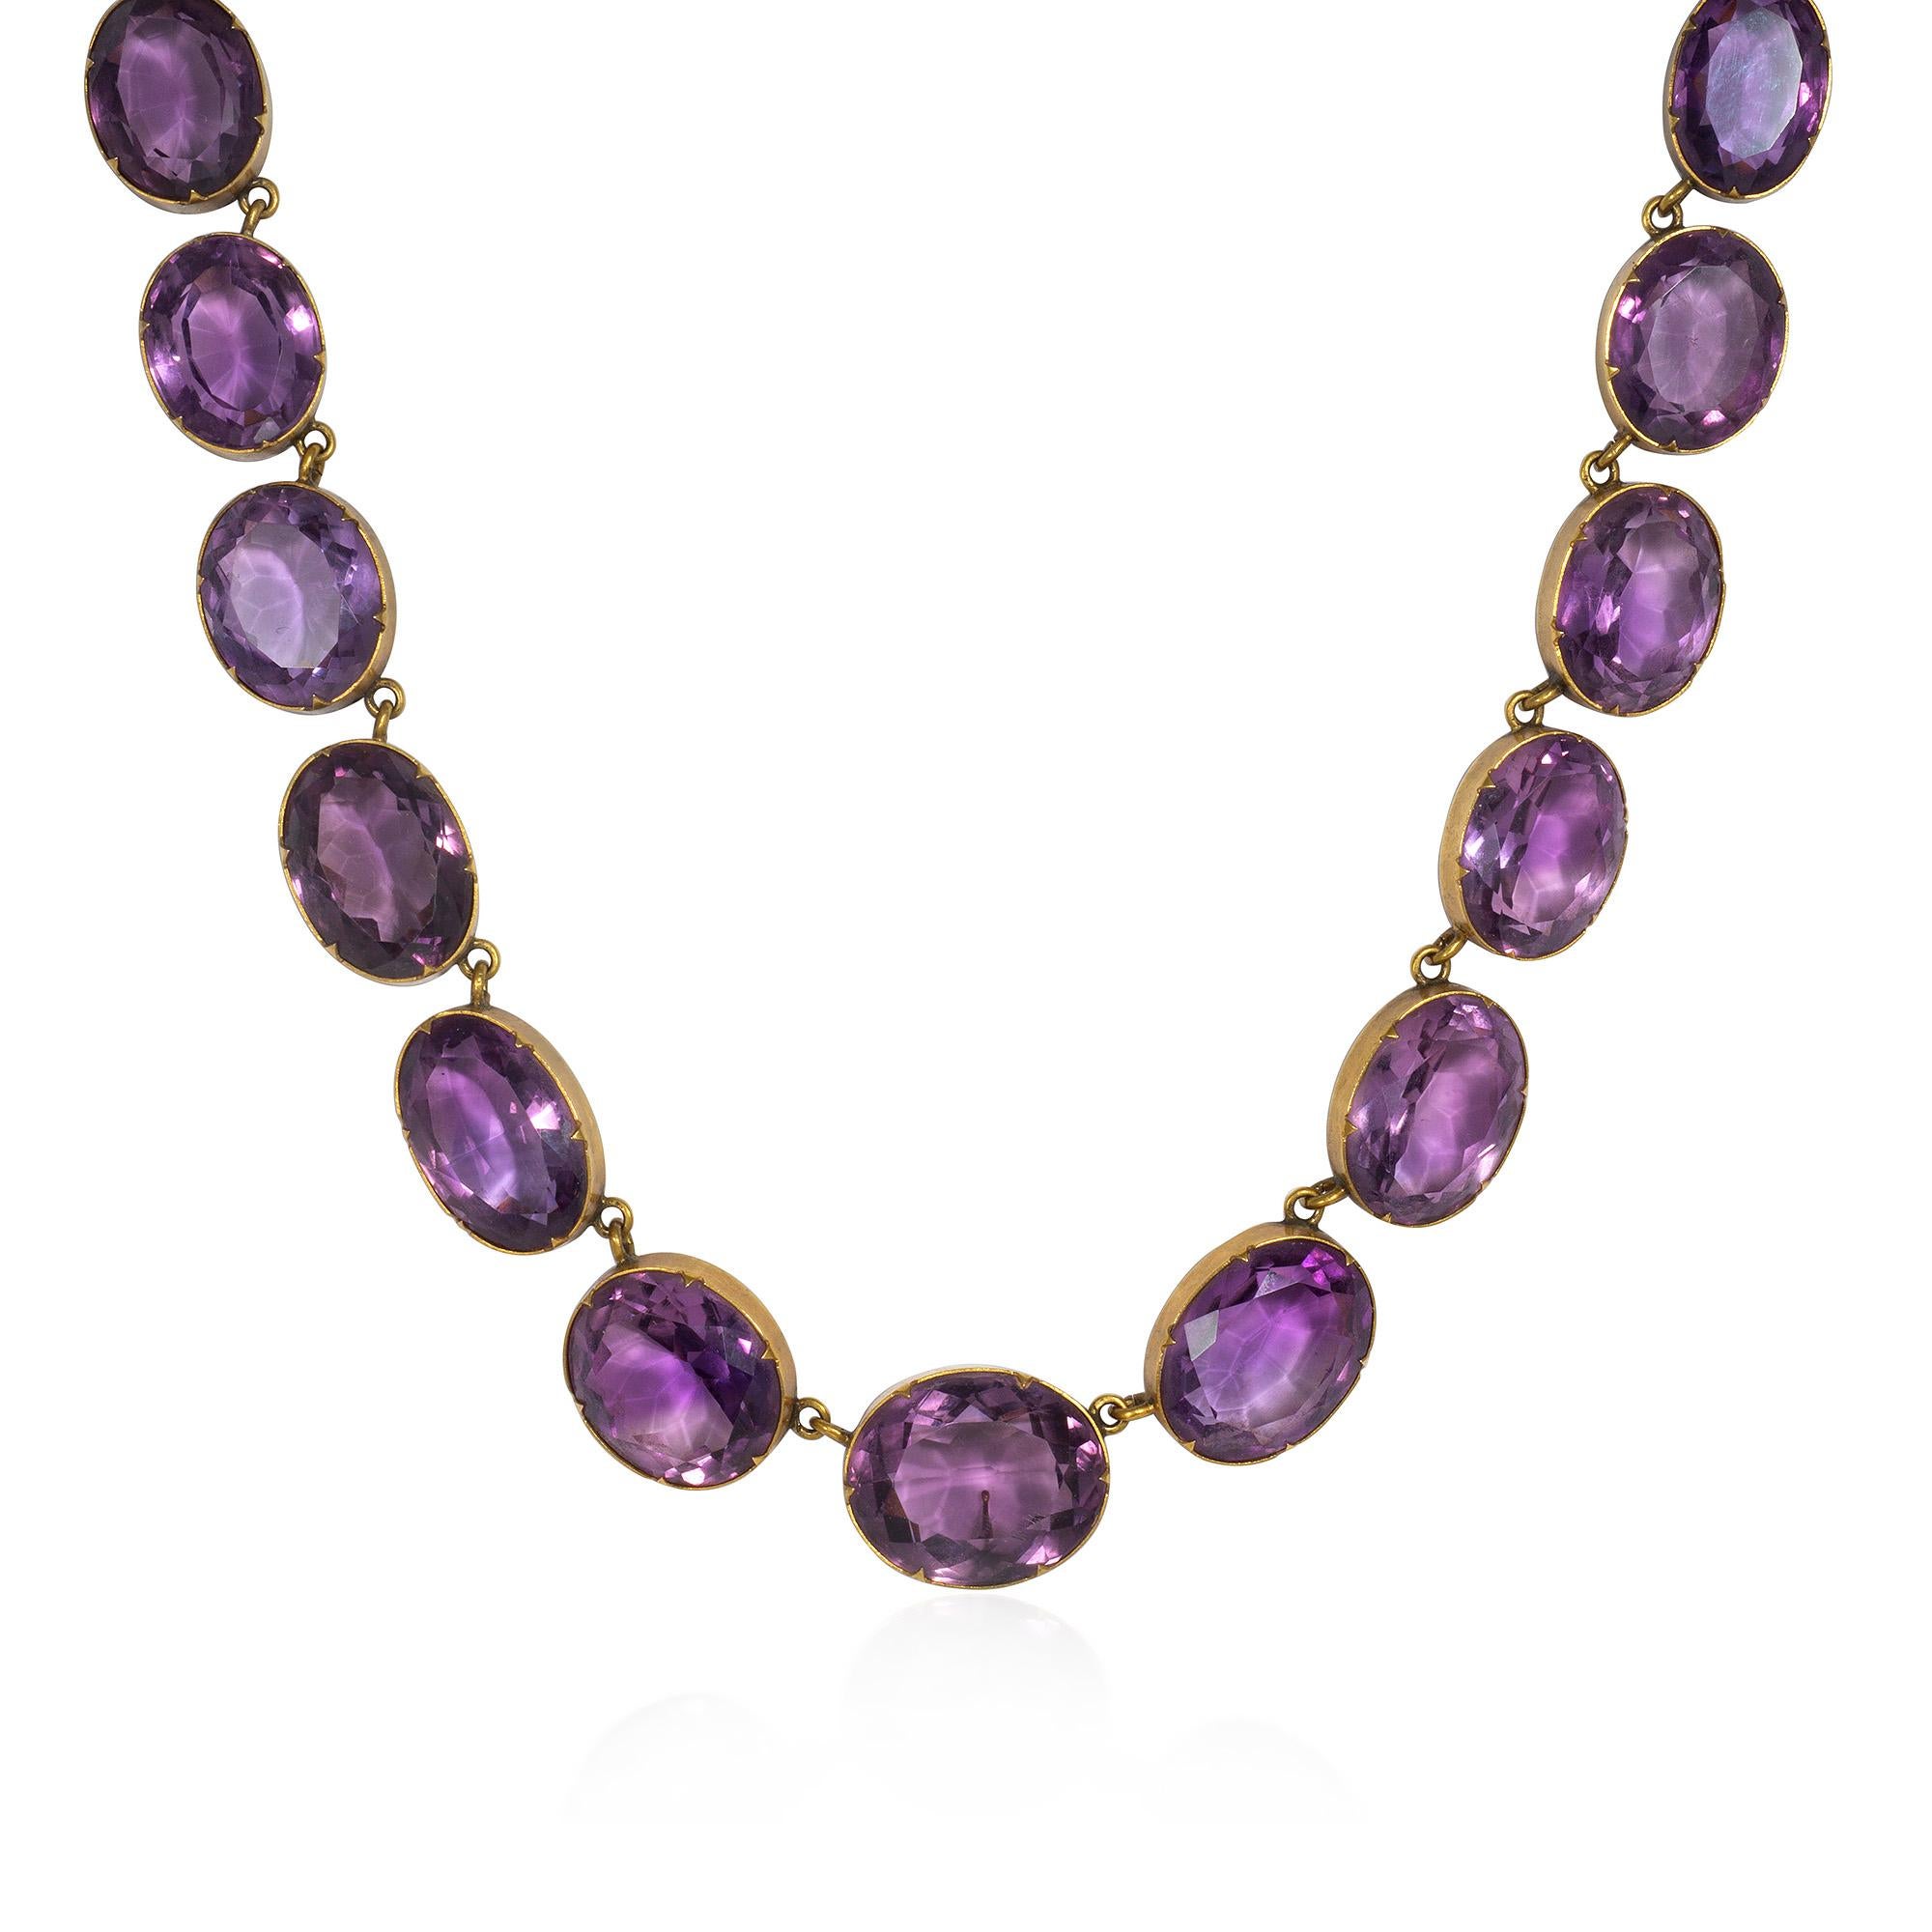 An antique Victorian period gold and amethyst rivière-style necklace composed of bezel-set oval amethysts suspending a detachable oversized oblong pendant, in 15k.  England.  Accompanied by the original box

Approximately 16